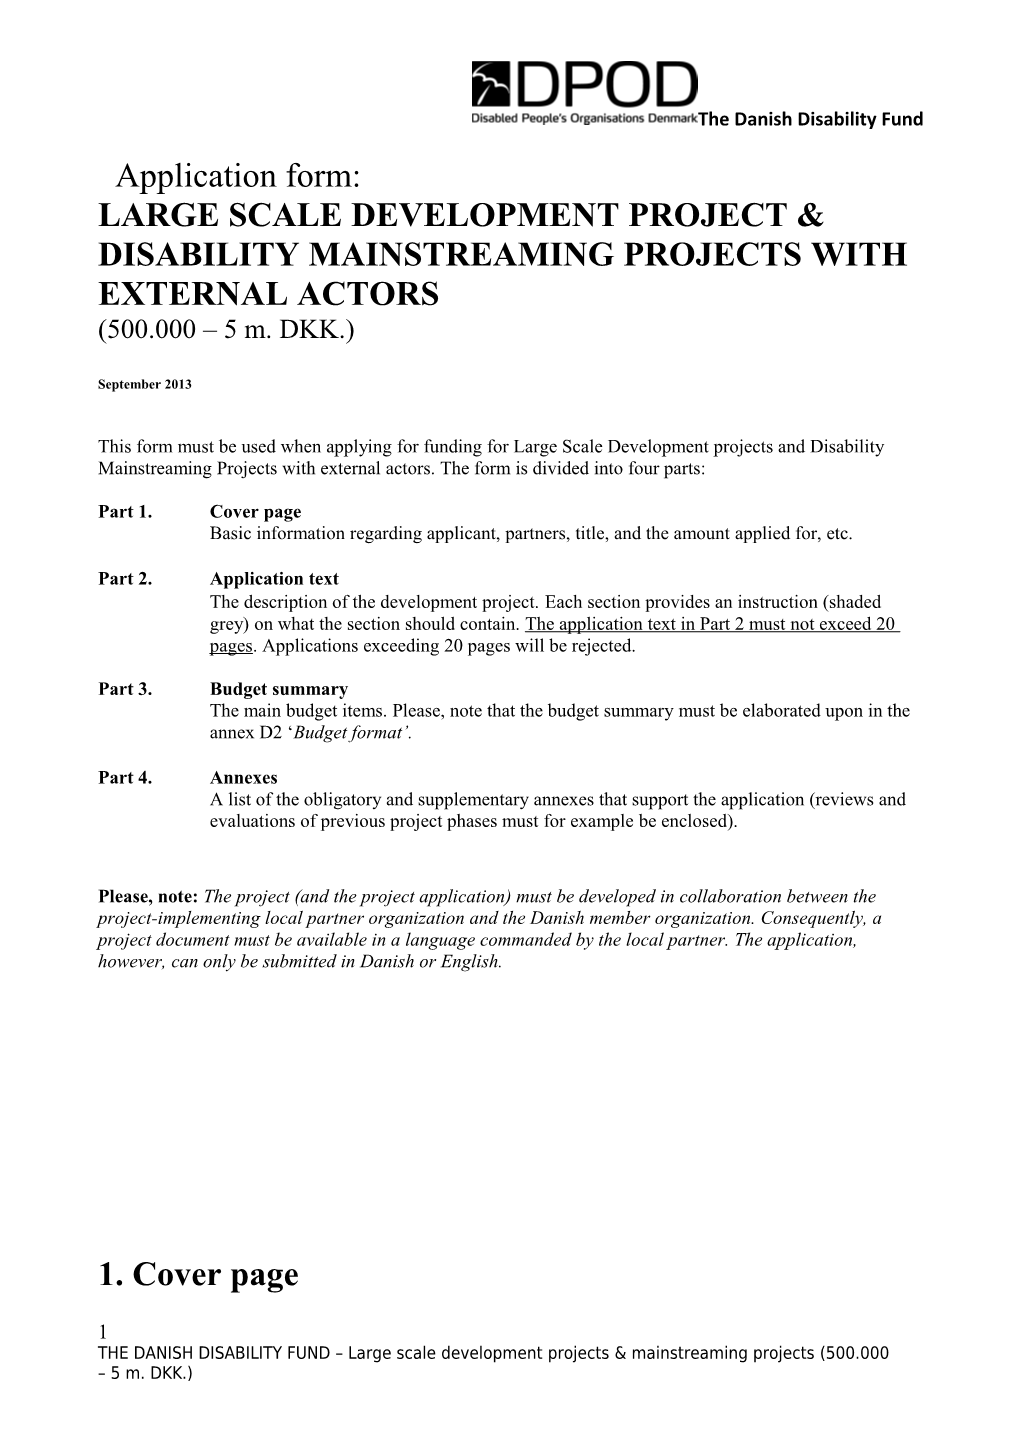 The Danish Disability Fund